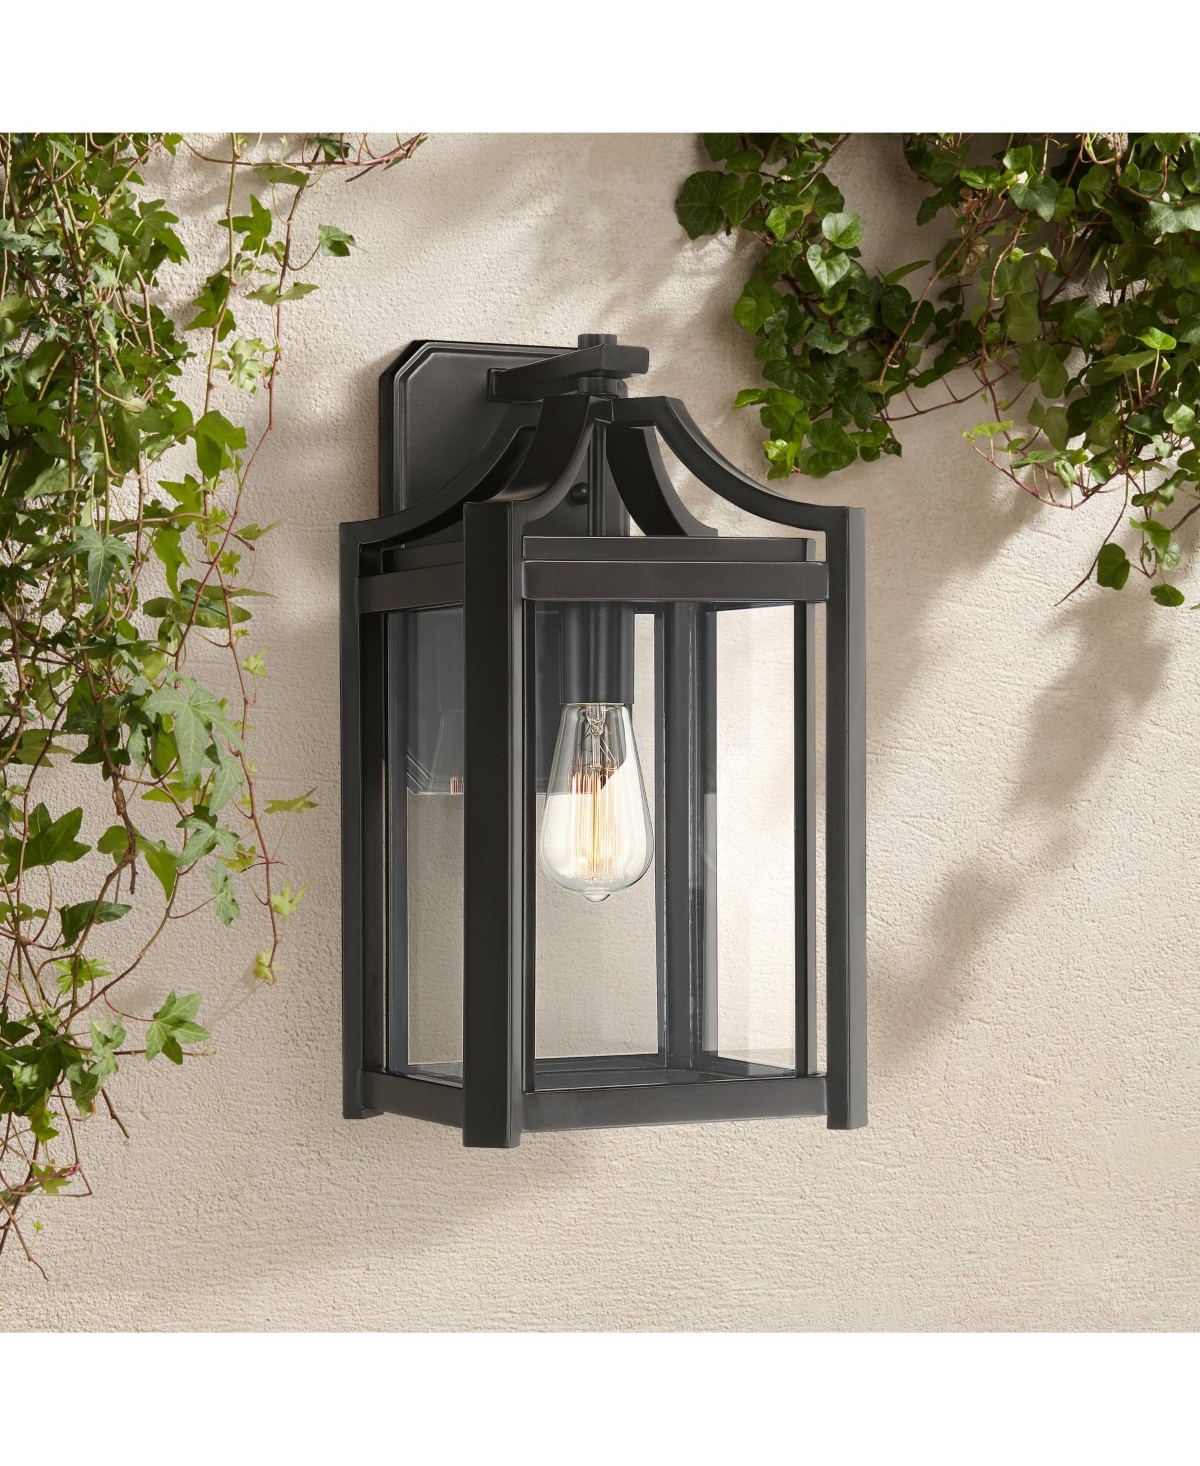 Rockford Rustic Farmhouse Box-Shaped Outdoor Wall Light Fixture Sleek Black Iron 16 1/4" Clear Beveled Glass for Exterior House Porch Patio Outside De